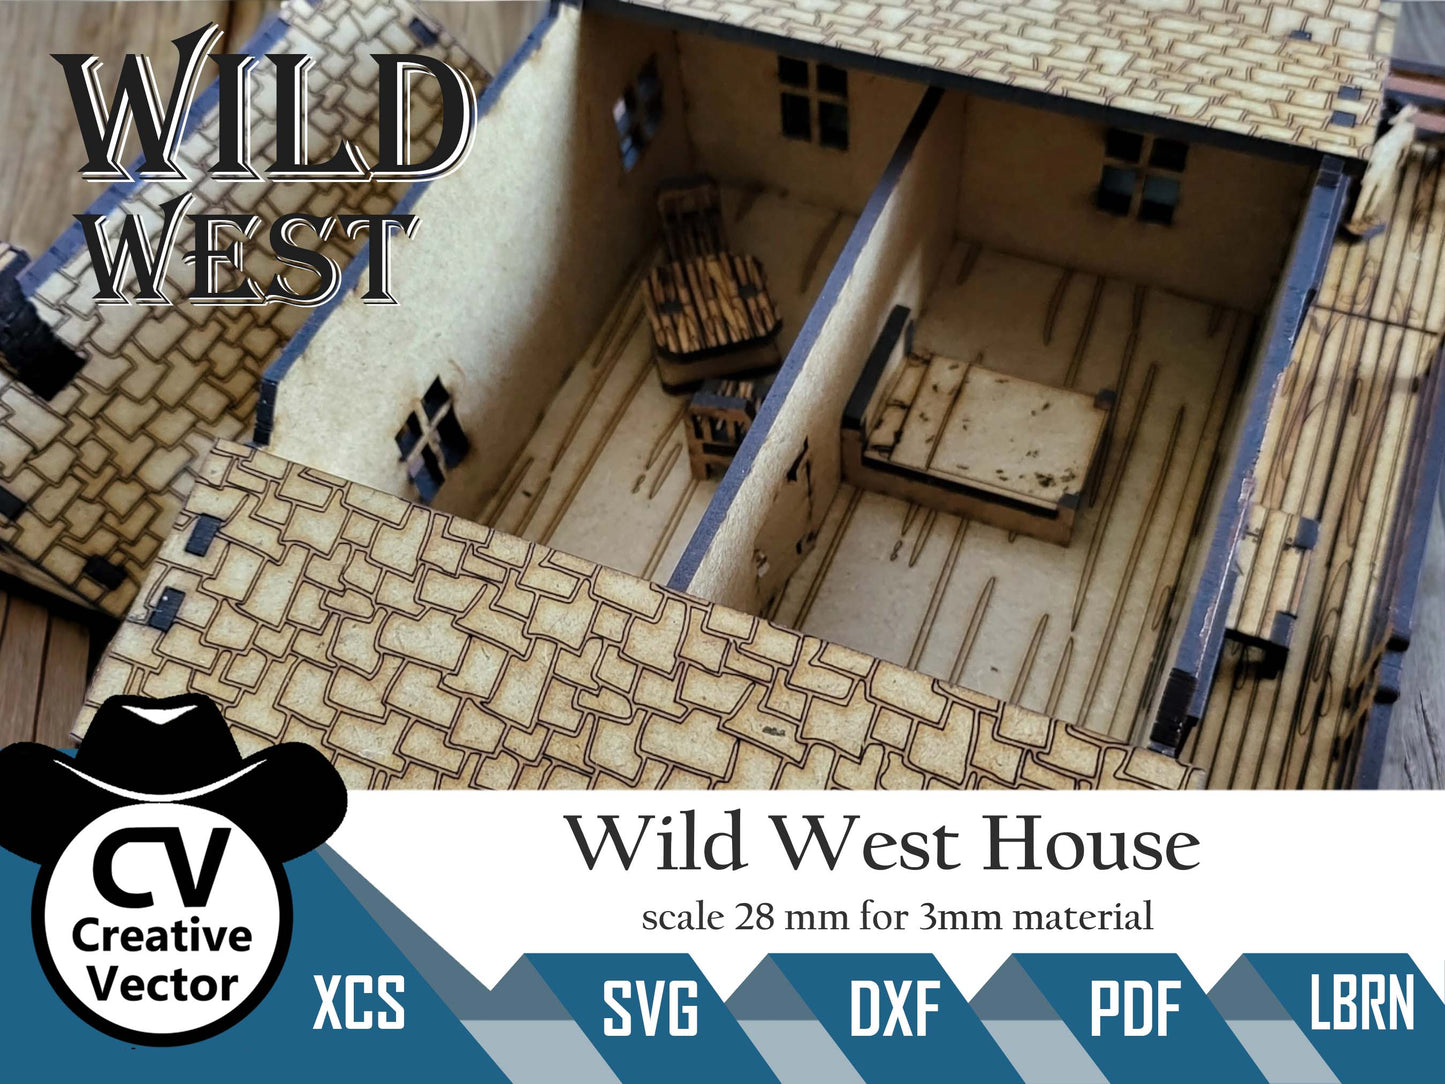 Wild West House in scale 28mm for Wargamers